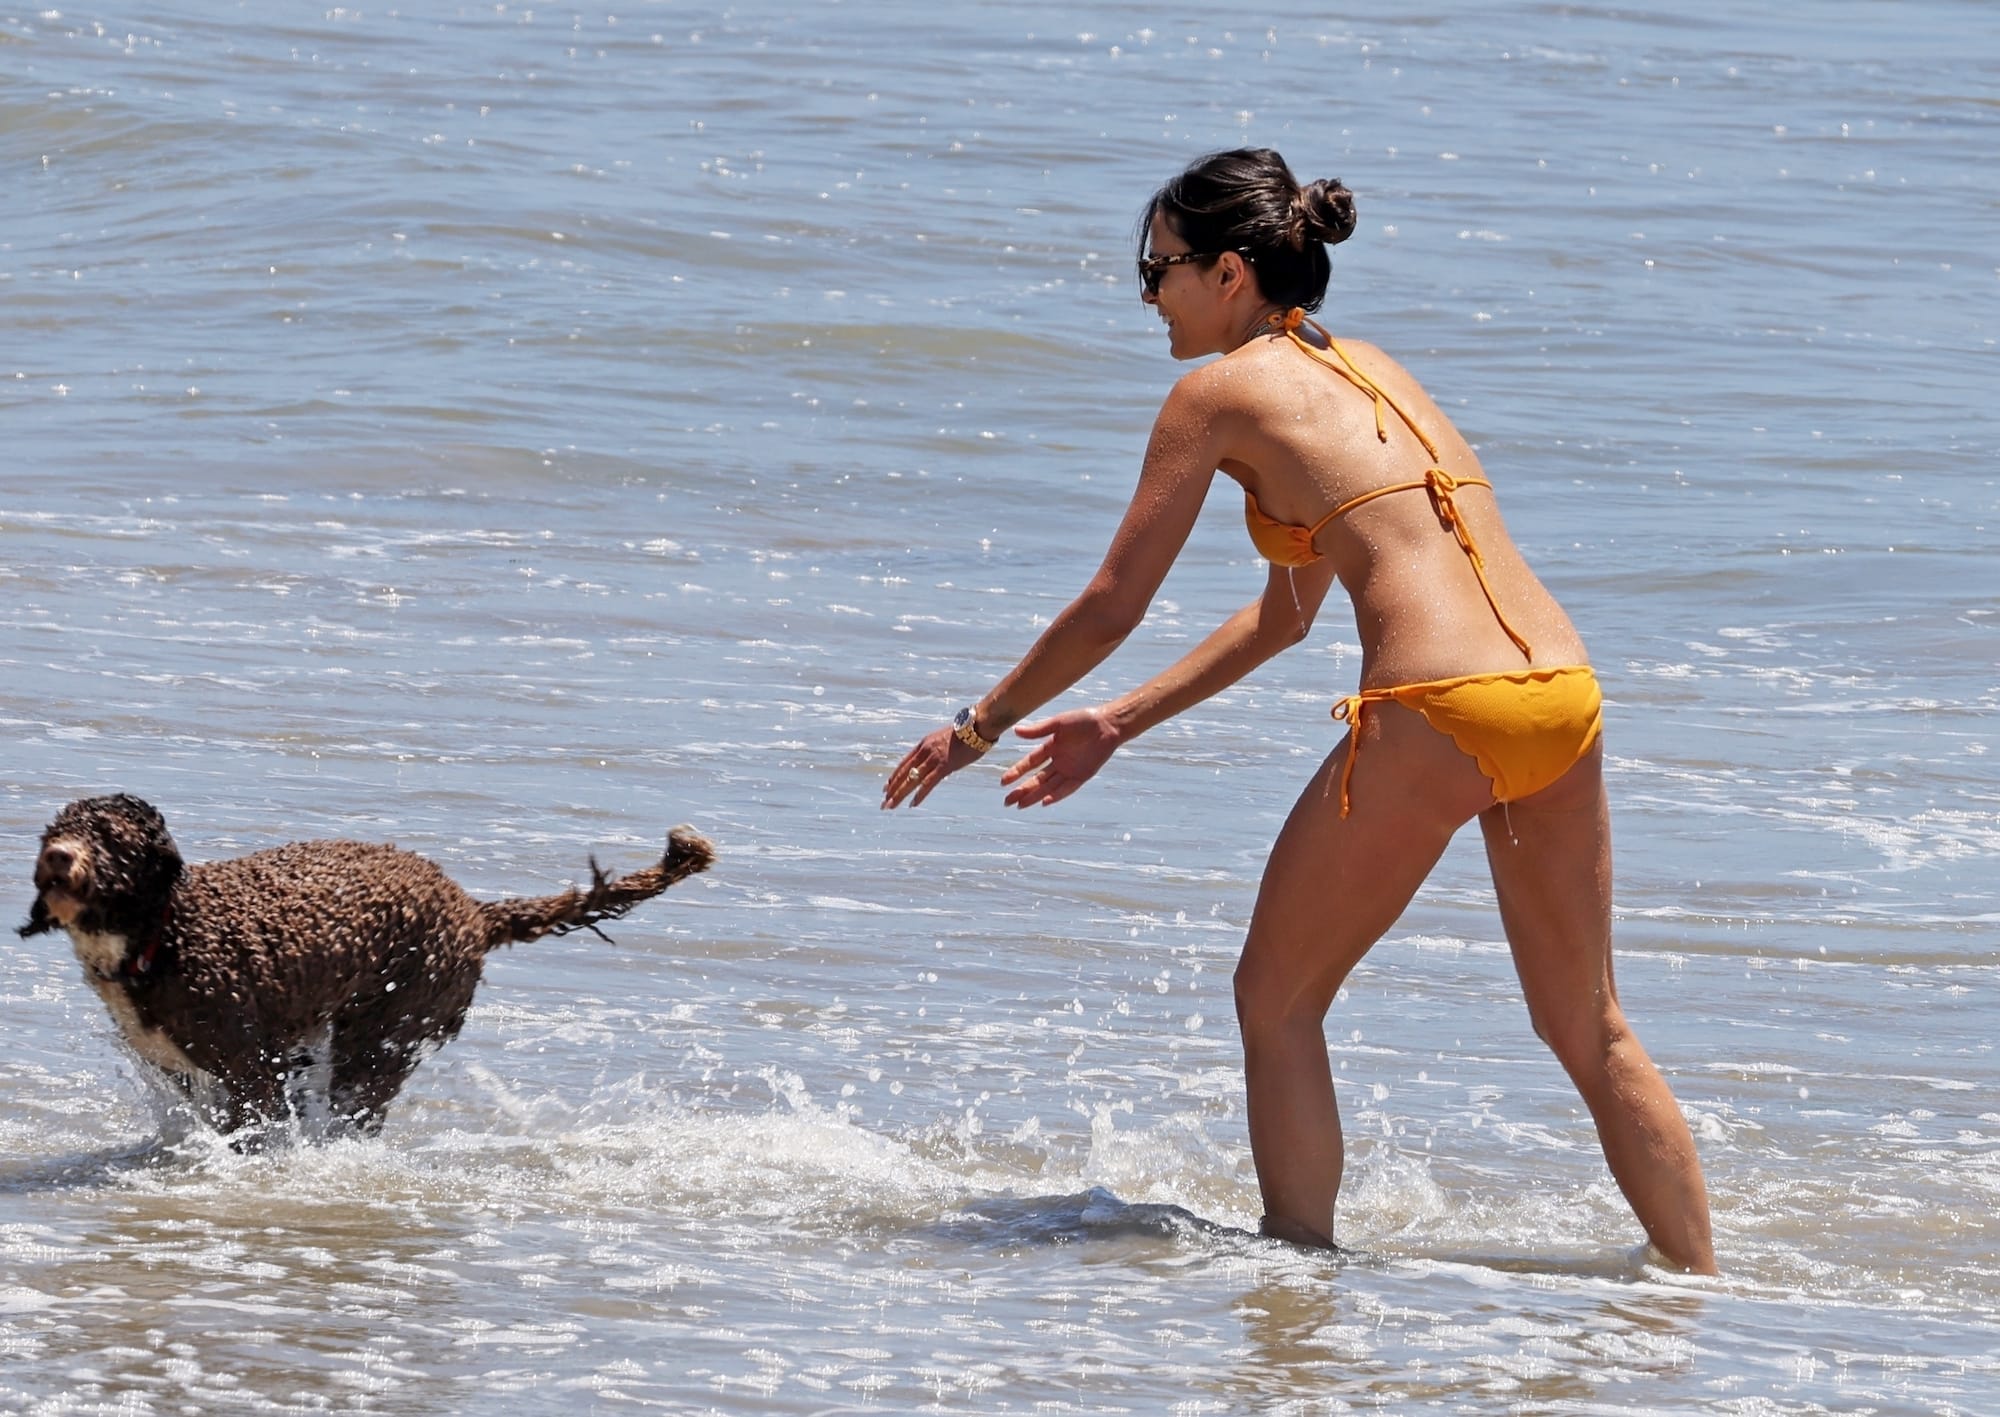 Jordana Brewster playing with her dog at Santa Monica Beach on June 7, 2022.